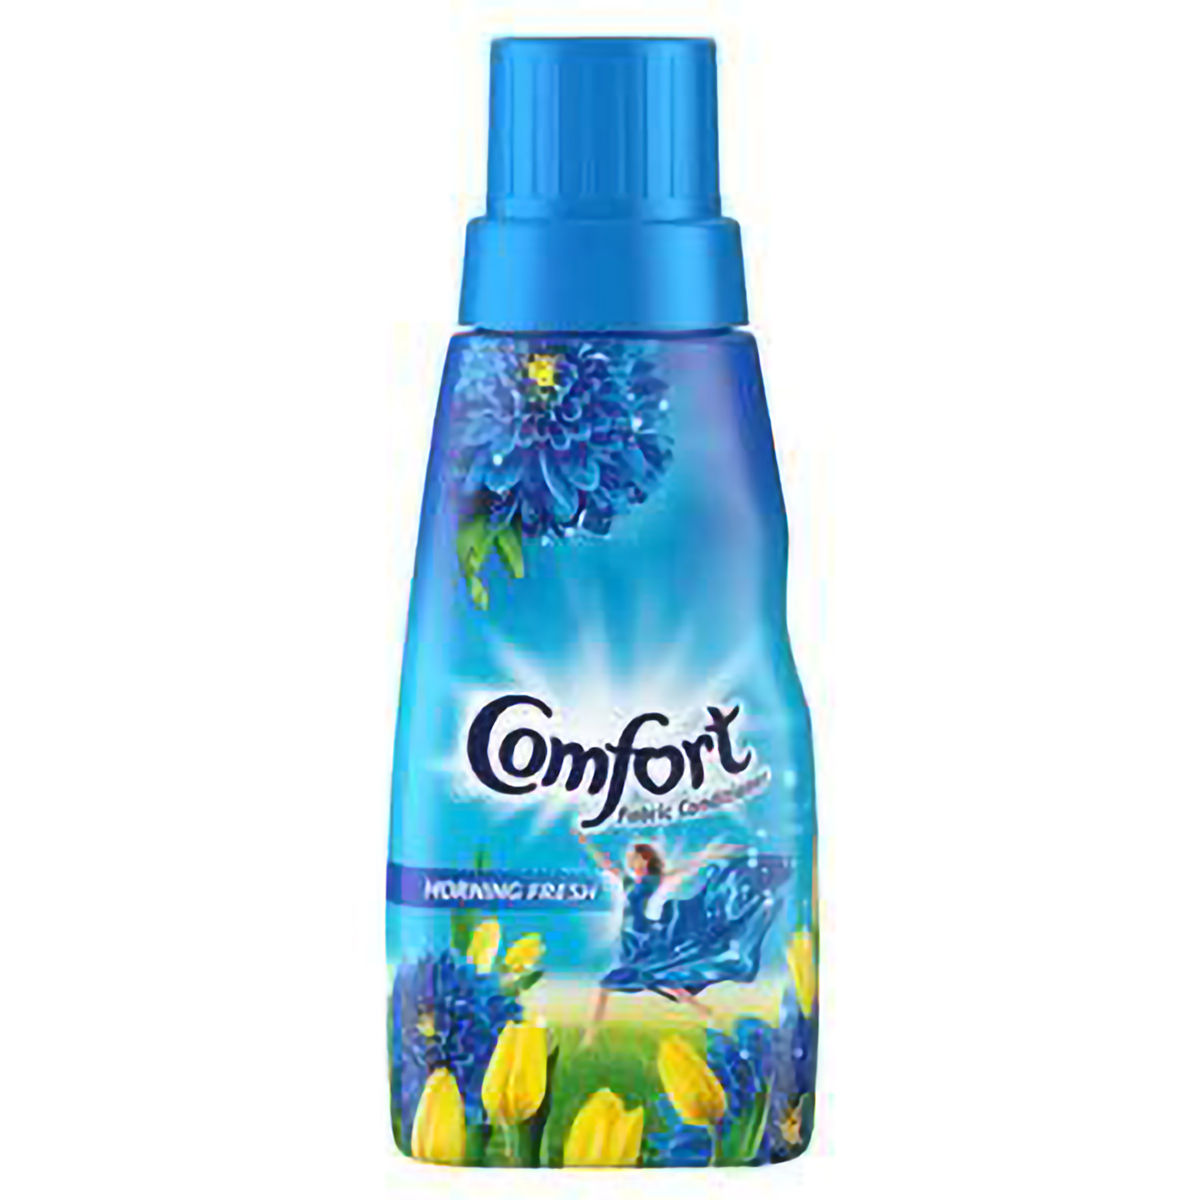 Buy Comfort After Wash Morning Fresh Fabric Conditioner, 220 ml Online